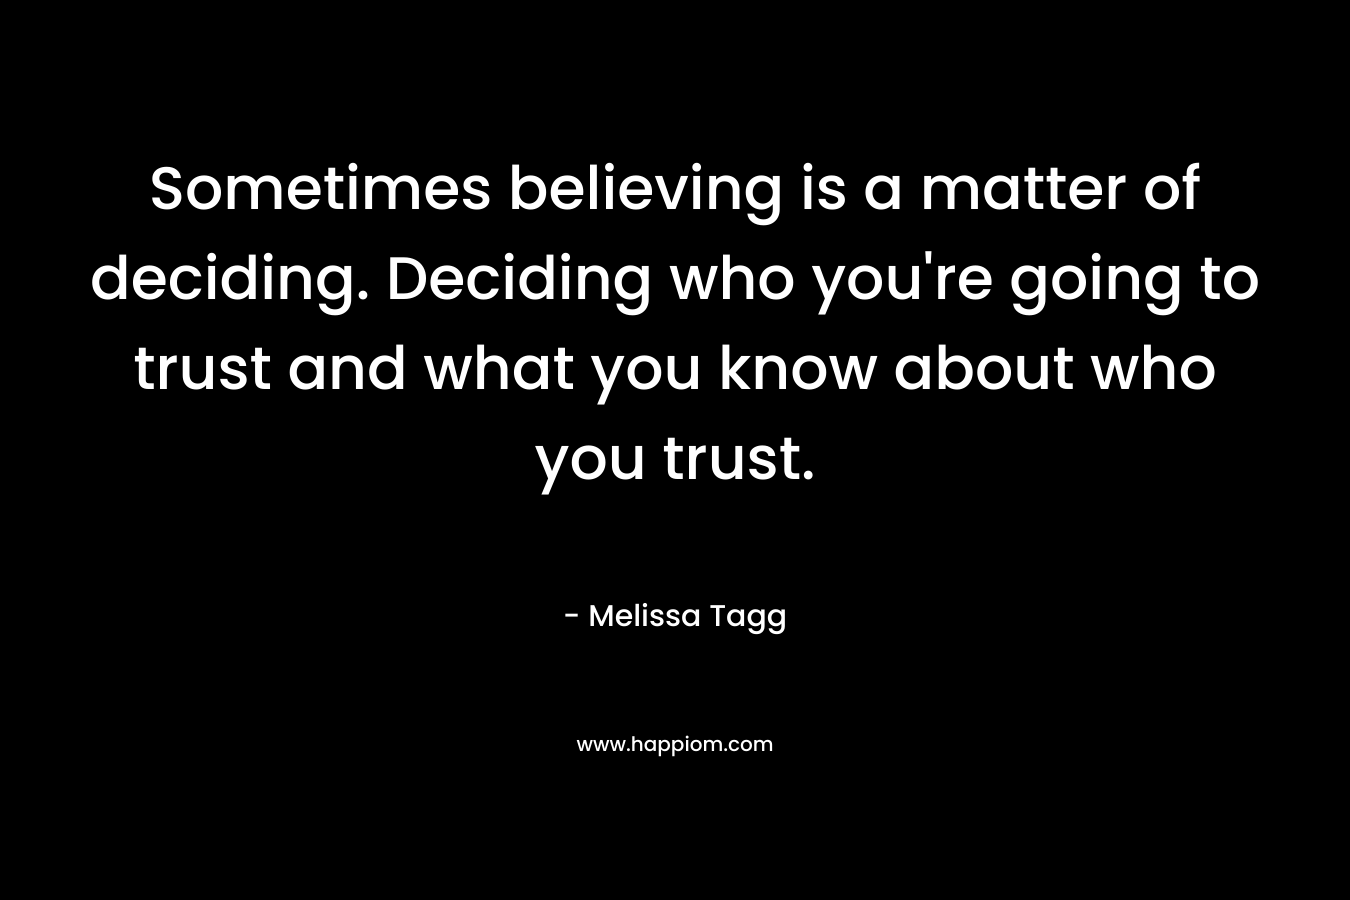 Sometimes believing is a matter of deciding. Deciding who you're going to trust and what you know about who you trust.